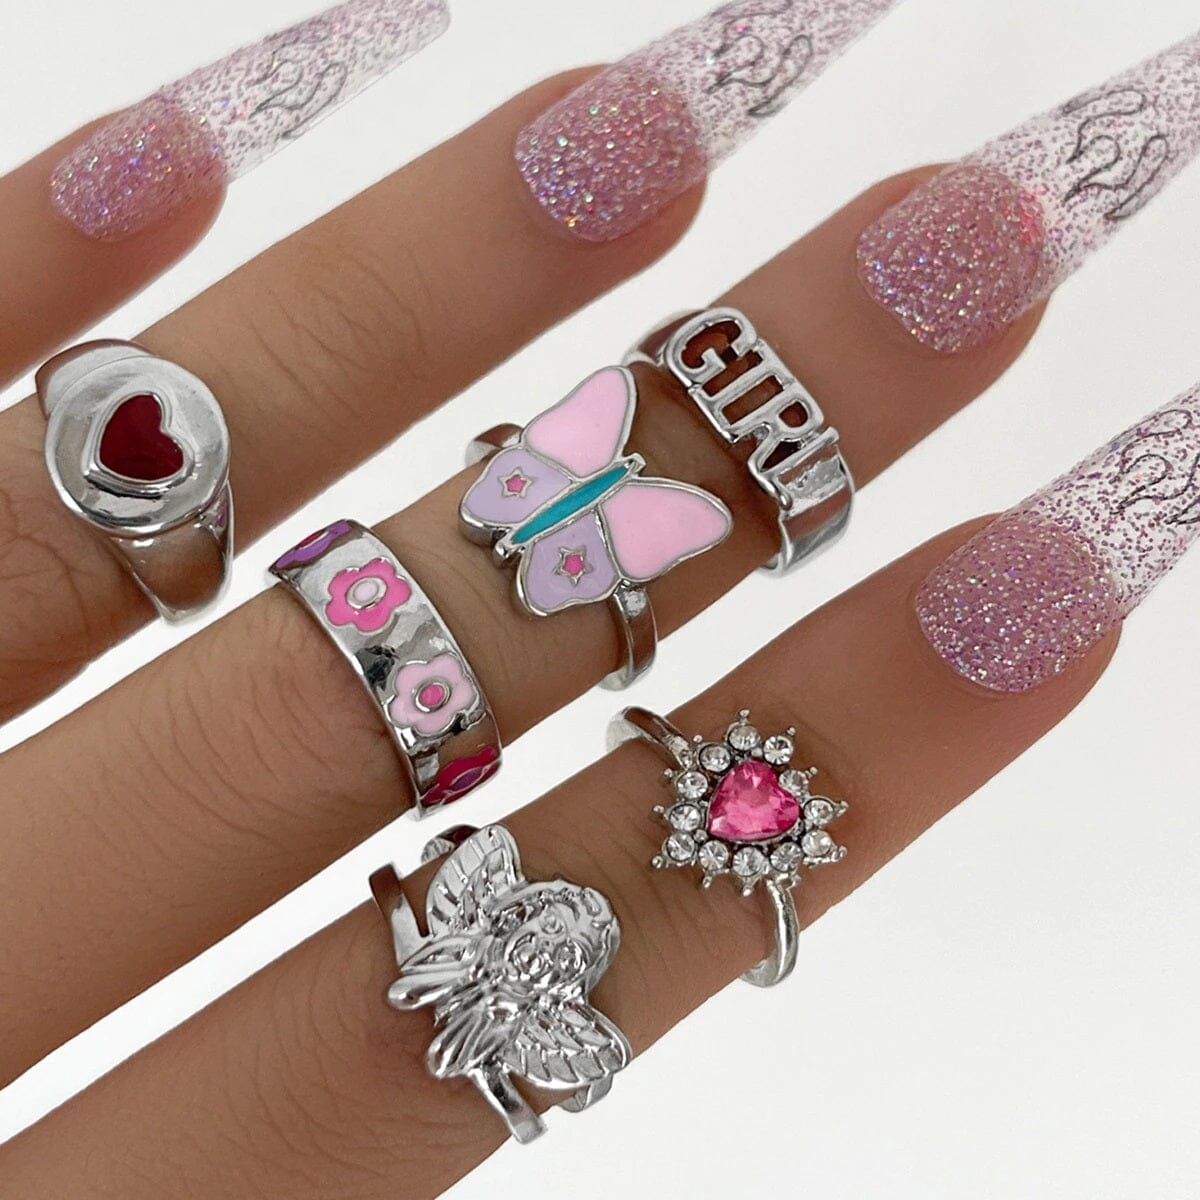 Women Teen Girls Vintage Cute Fashion Knuckle Stacking Ring Set_ Jewelry jehouze 10 